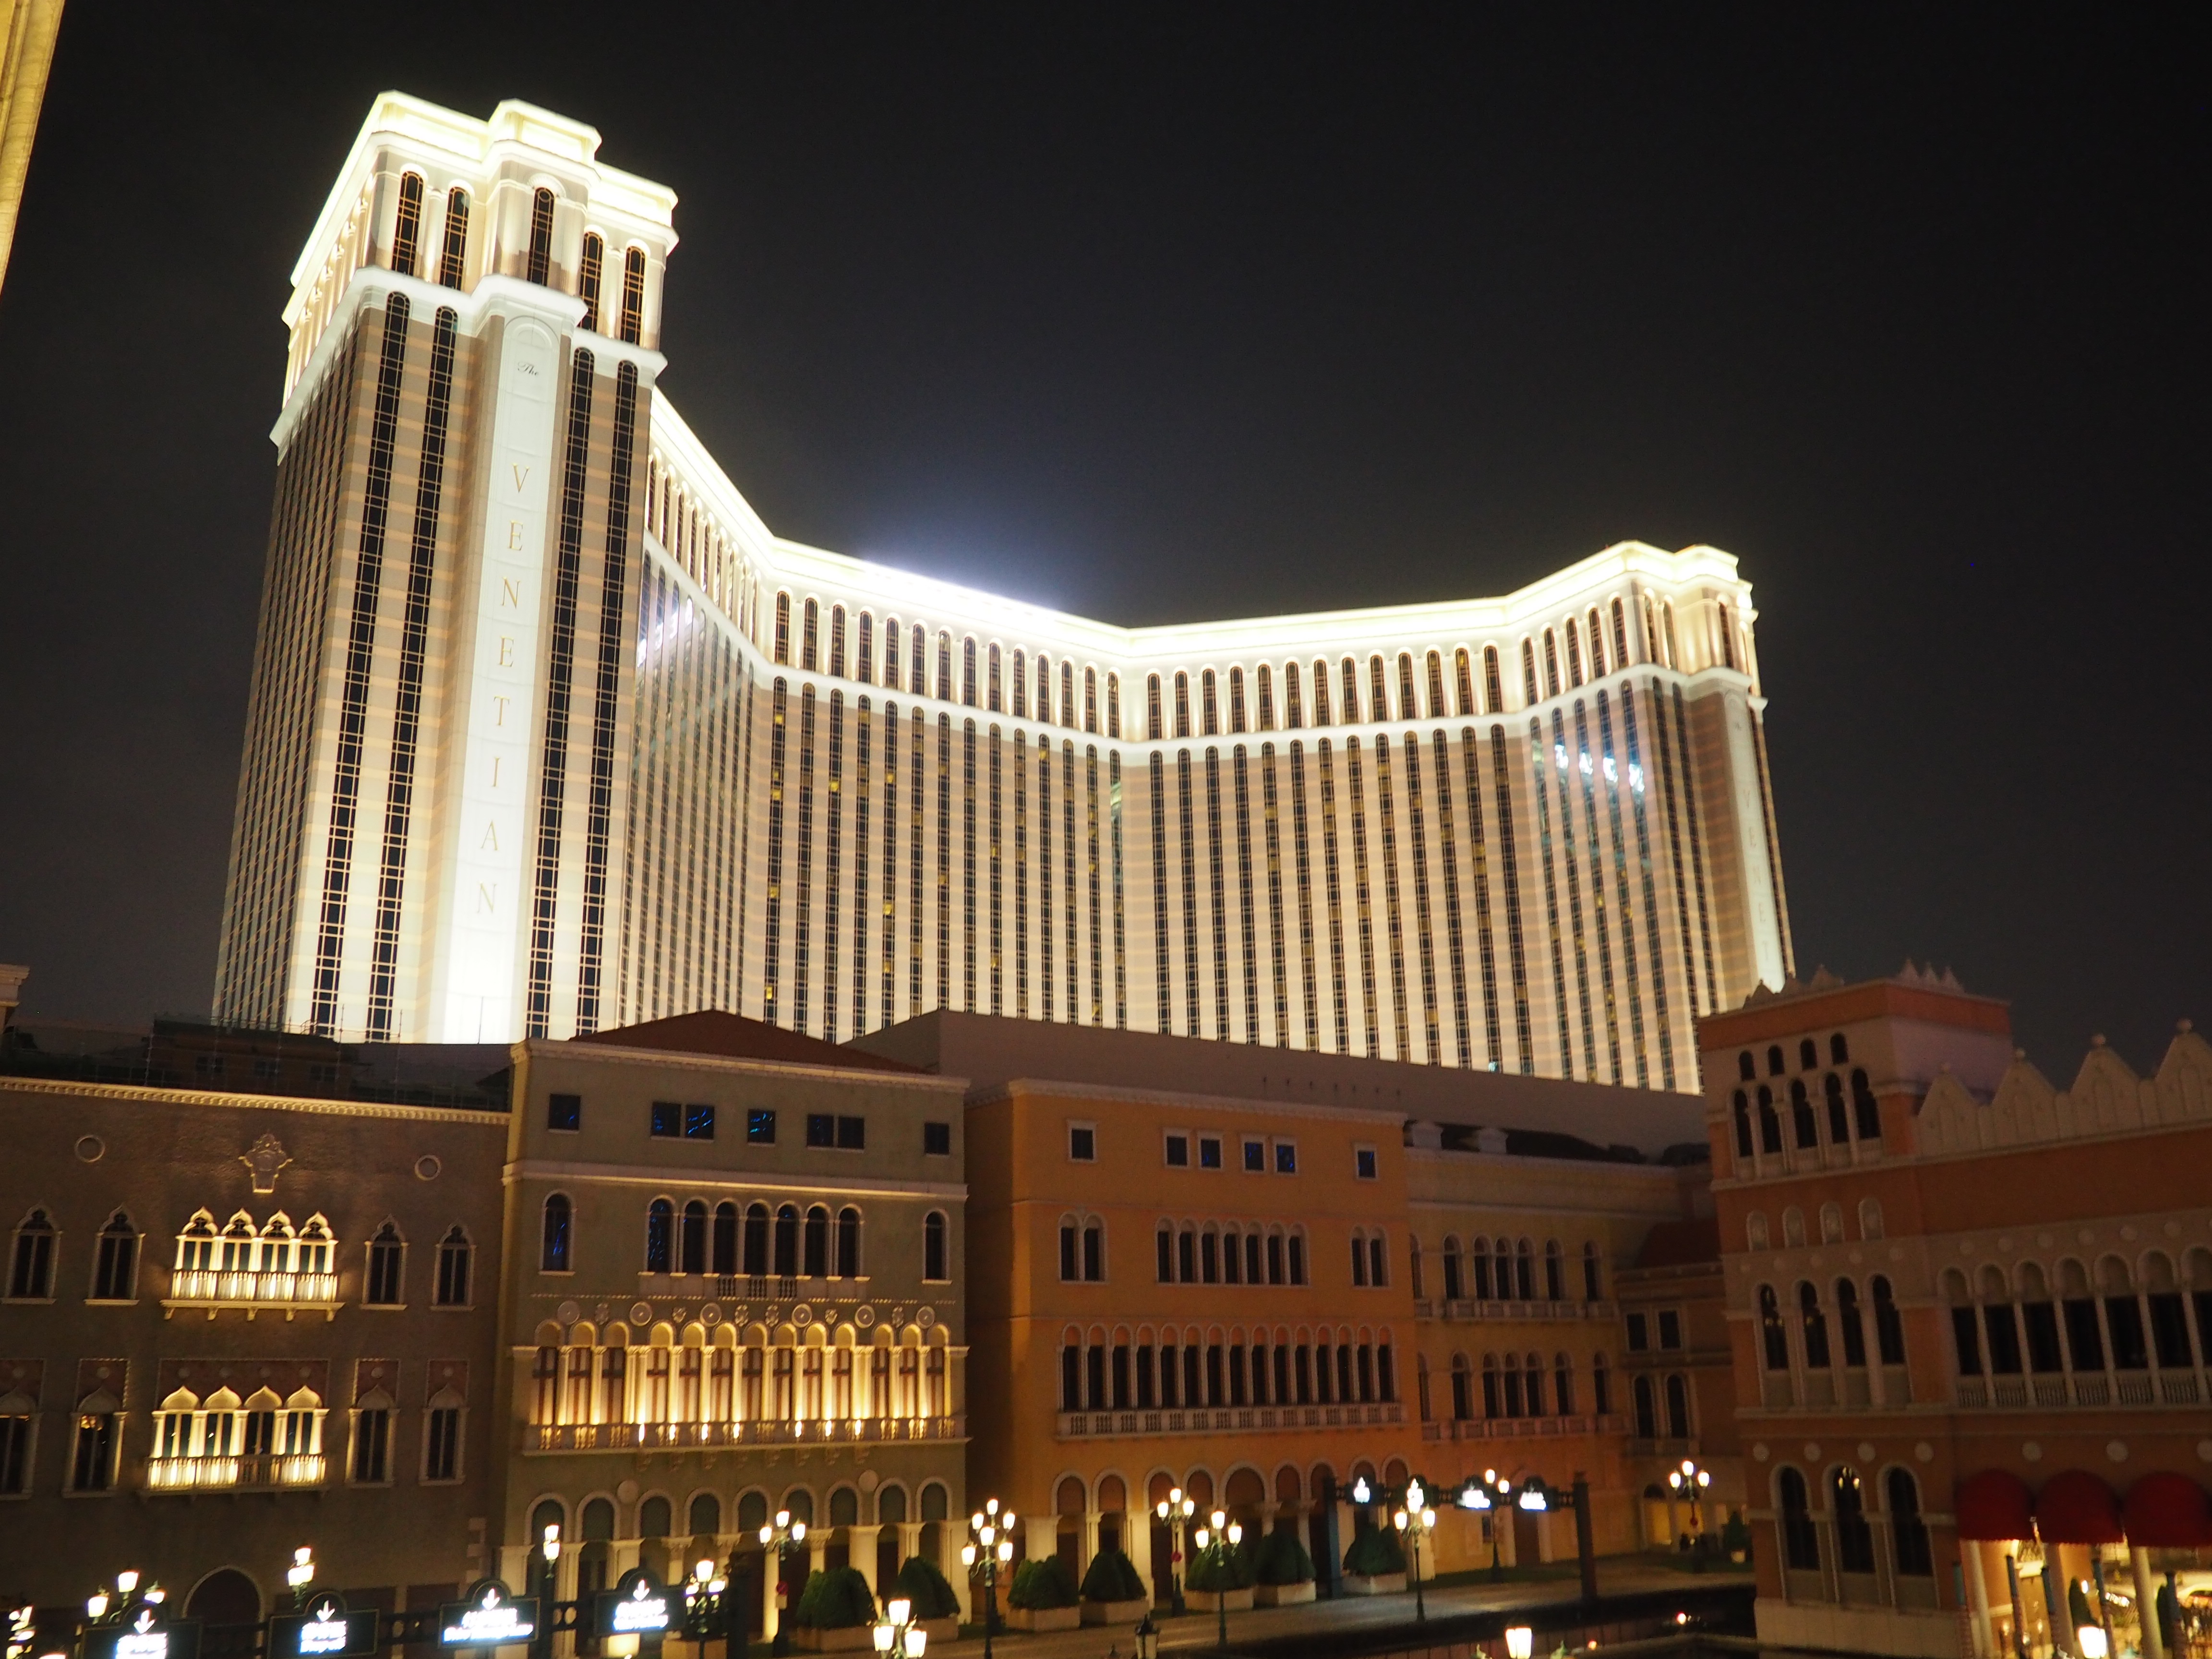 Click here for pictures of Macau.